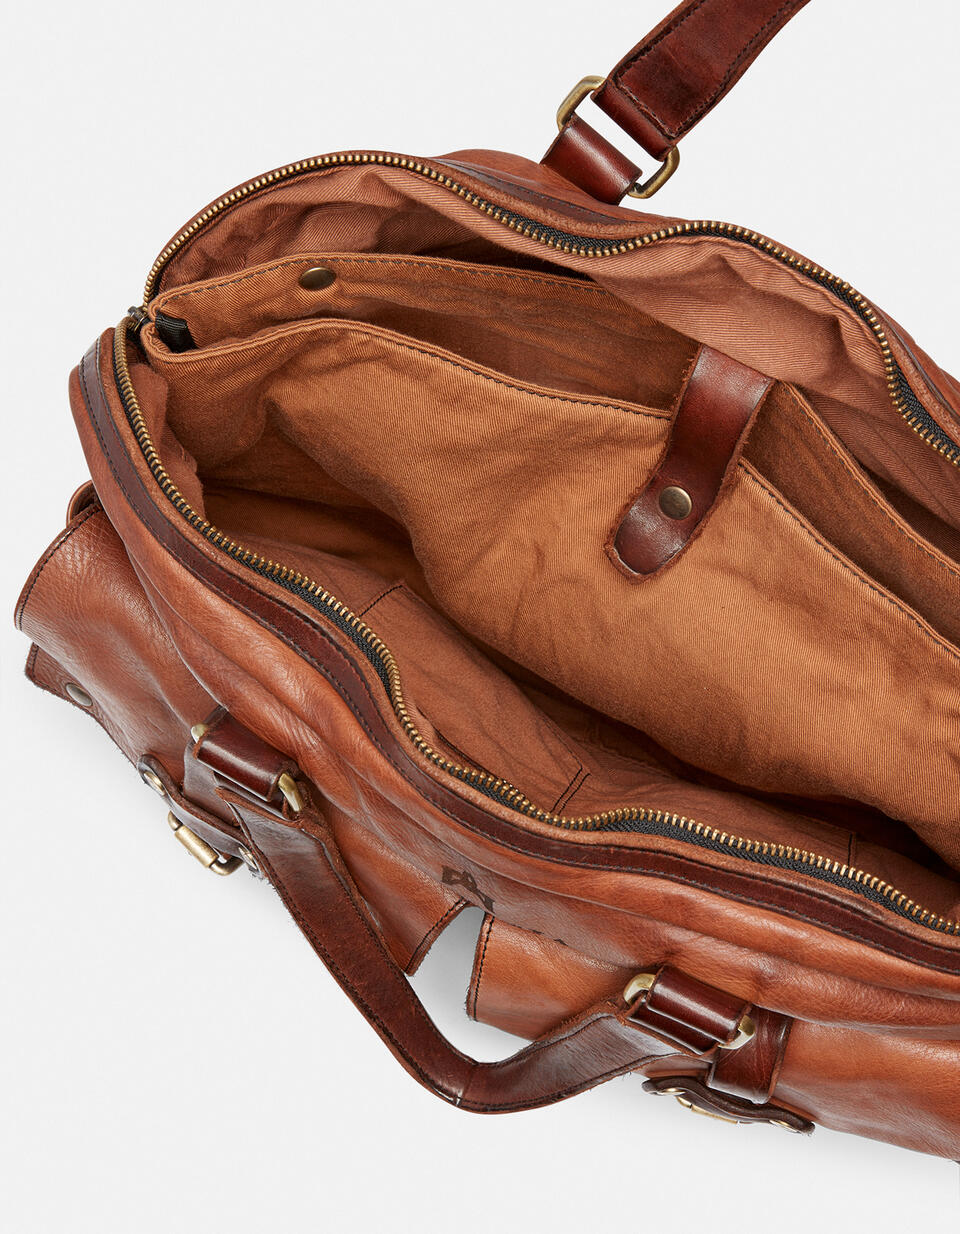 Millennial briefcase in natural leather - Briefcases and Laptop Bags | Briefcases BRUCIATO - Briefcases and Laptop Bags | BriefcasesCuoieria Fiorentina